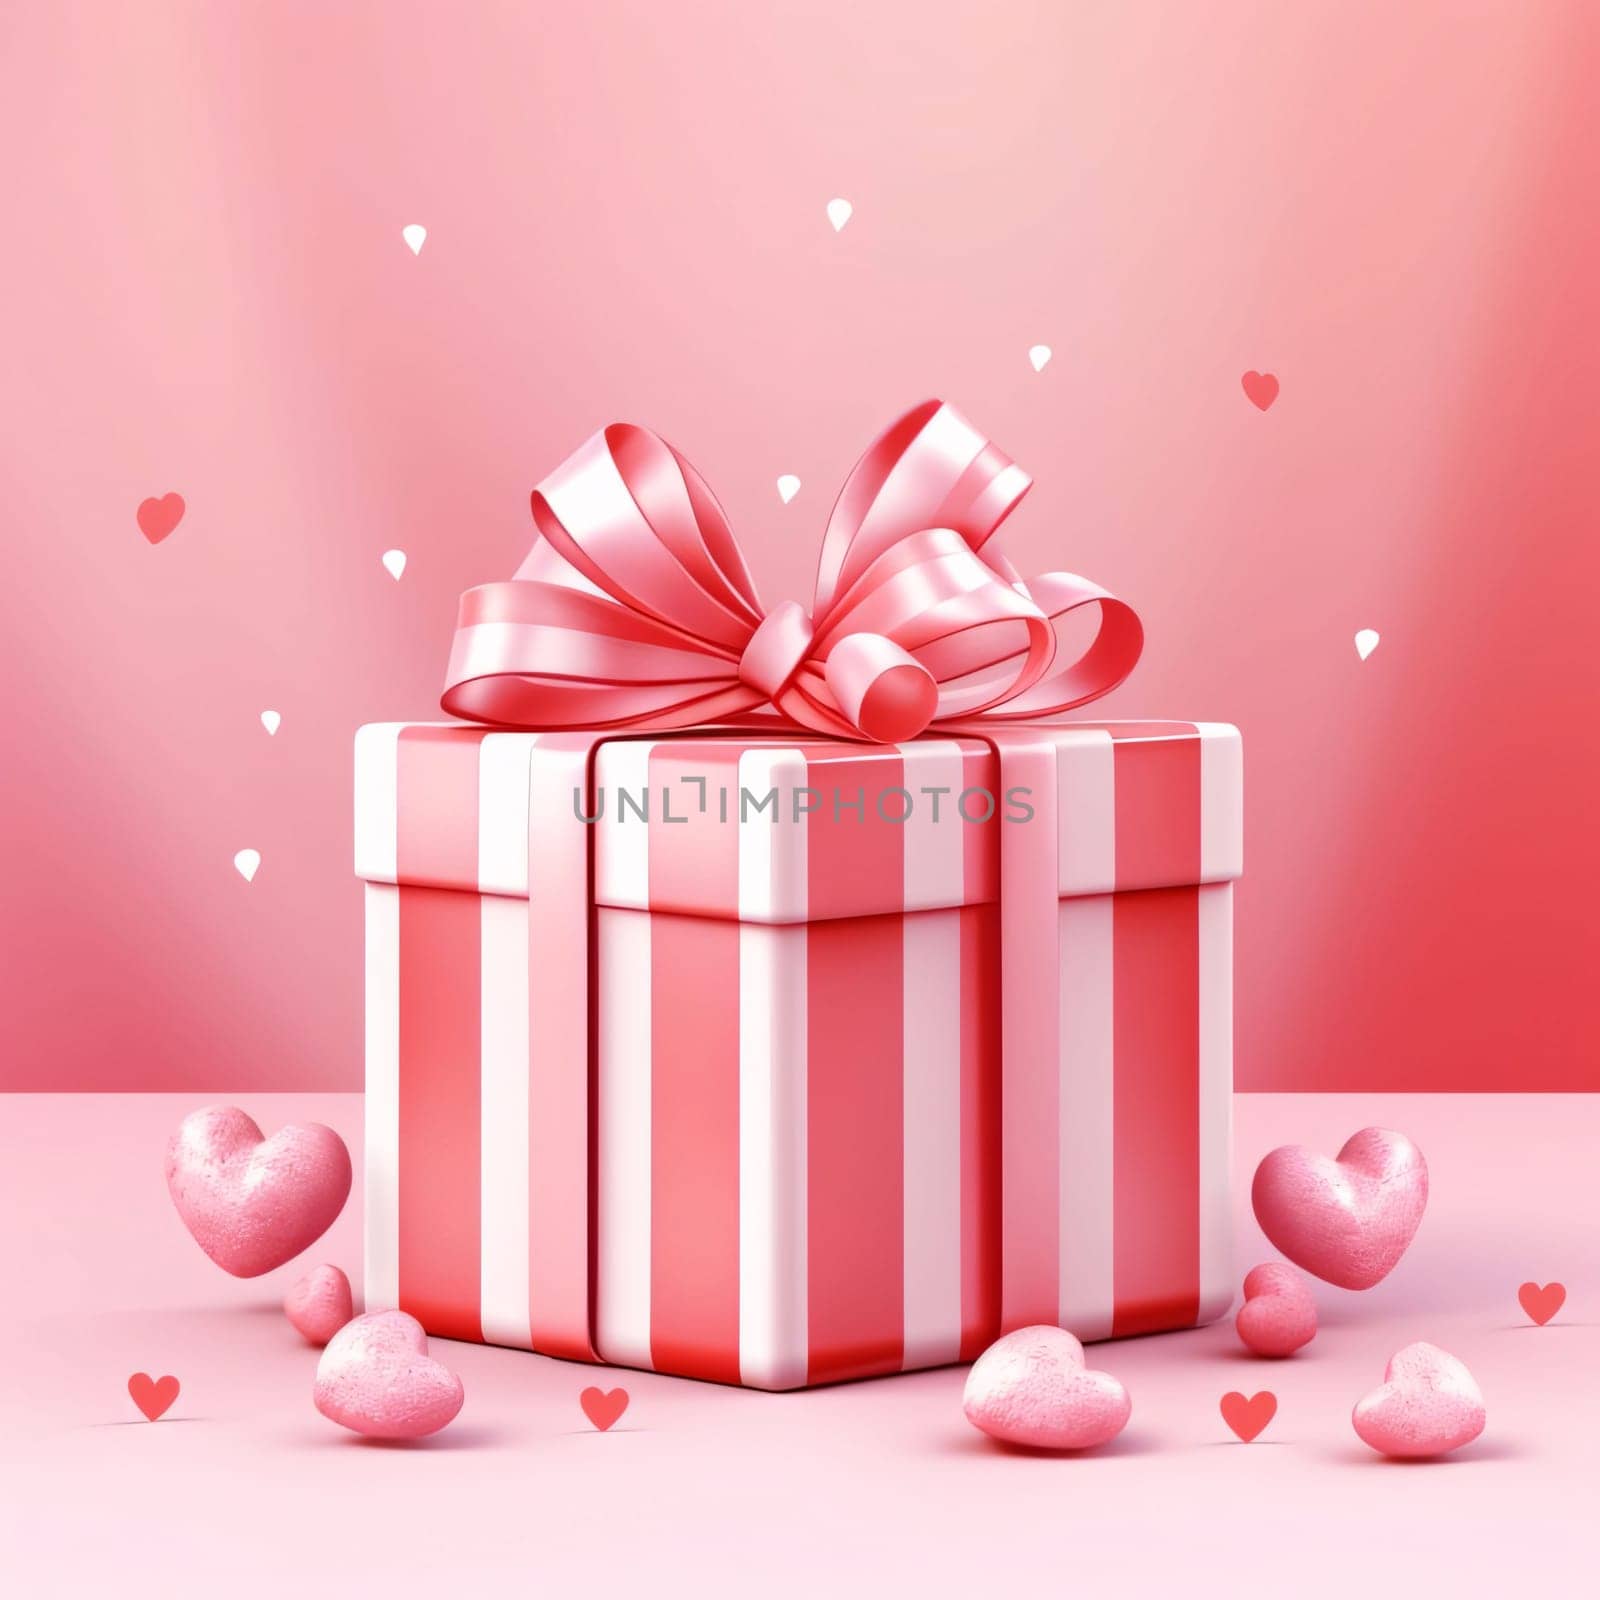 White gift with pink bow around the heart.Valentine's Day banner with space for your own content. Heart as a symbol of affection and love.